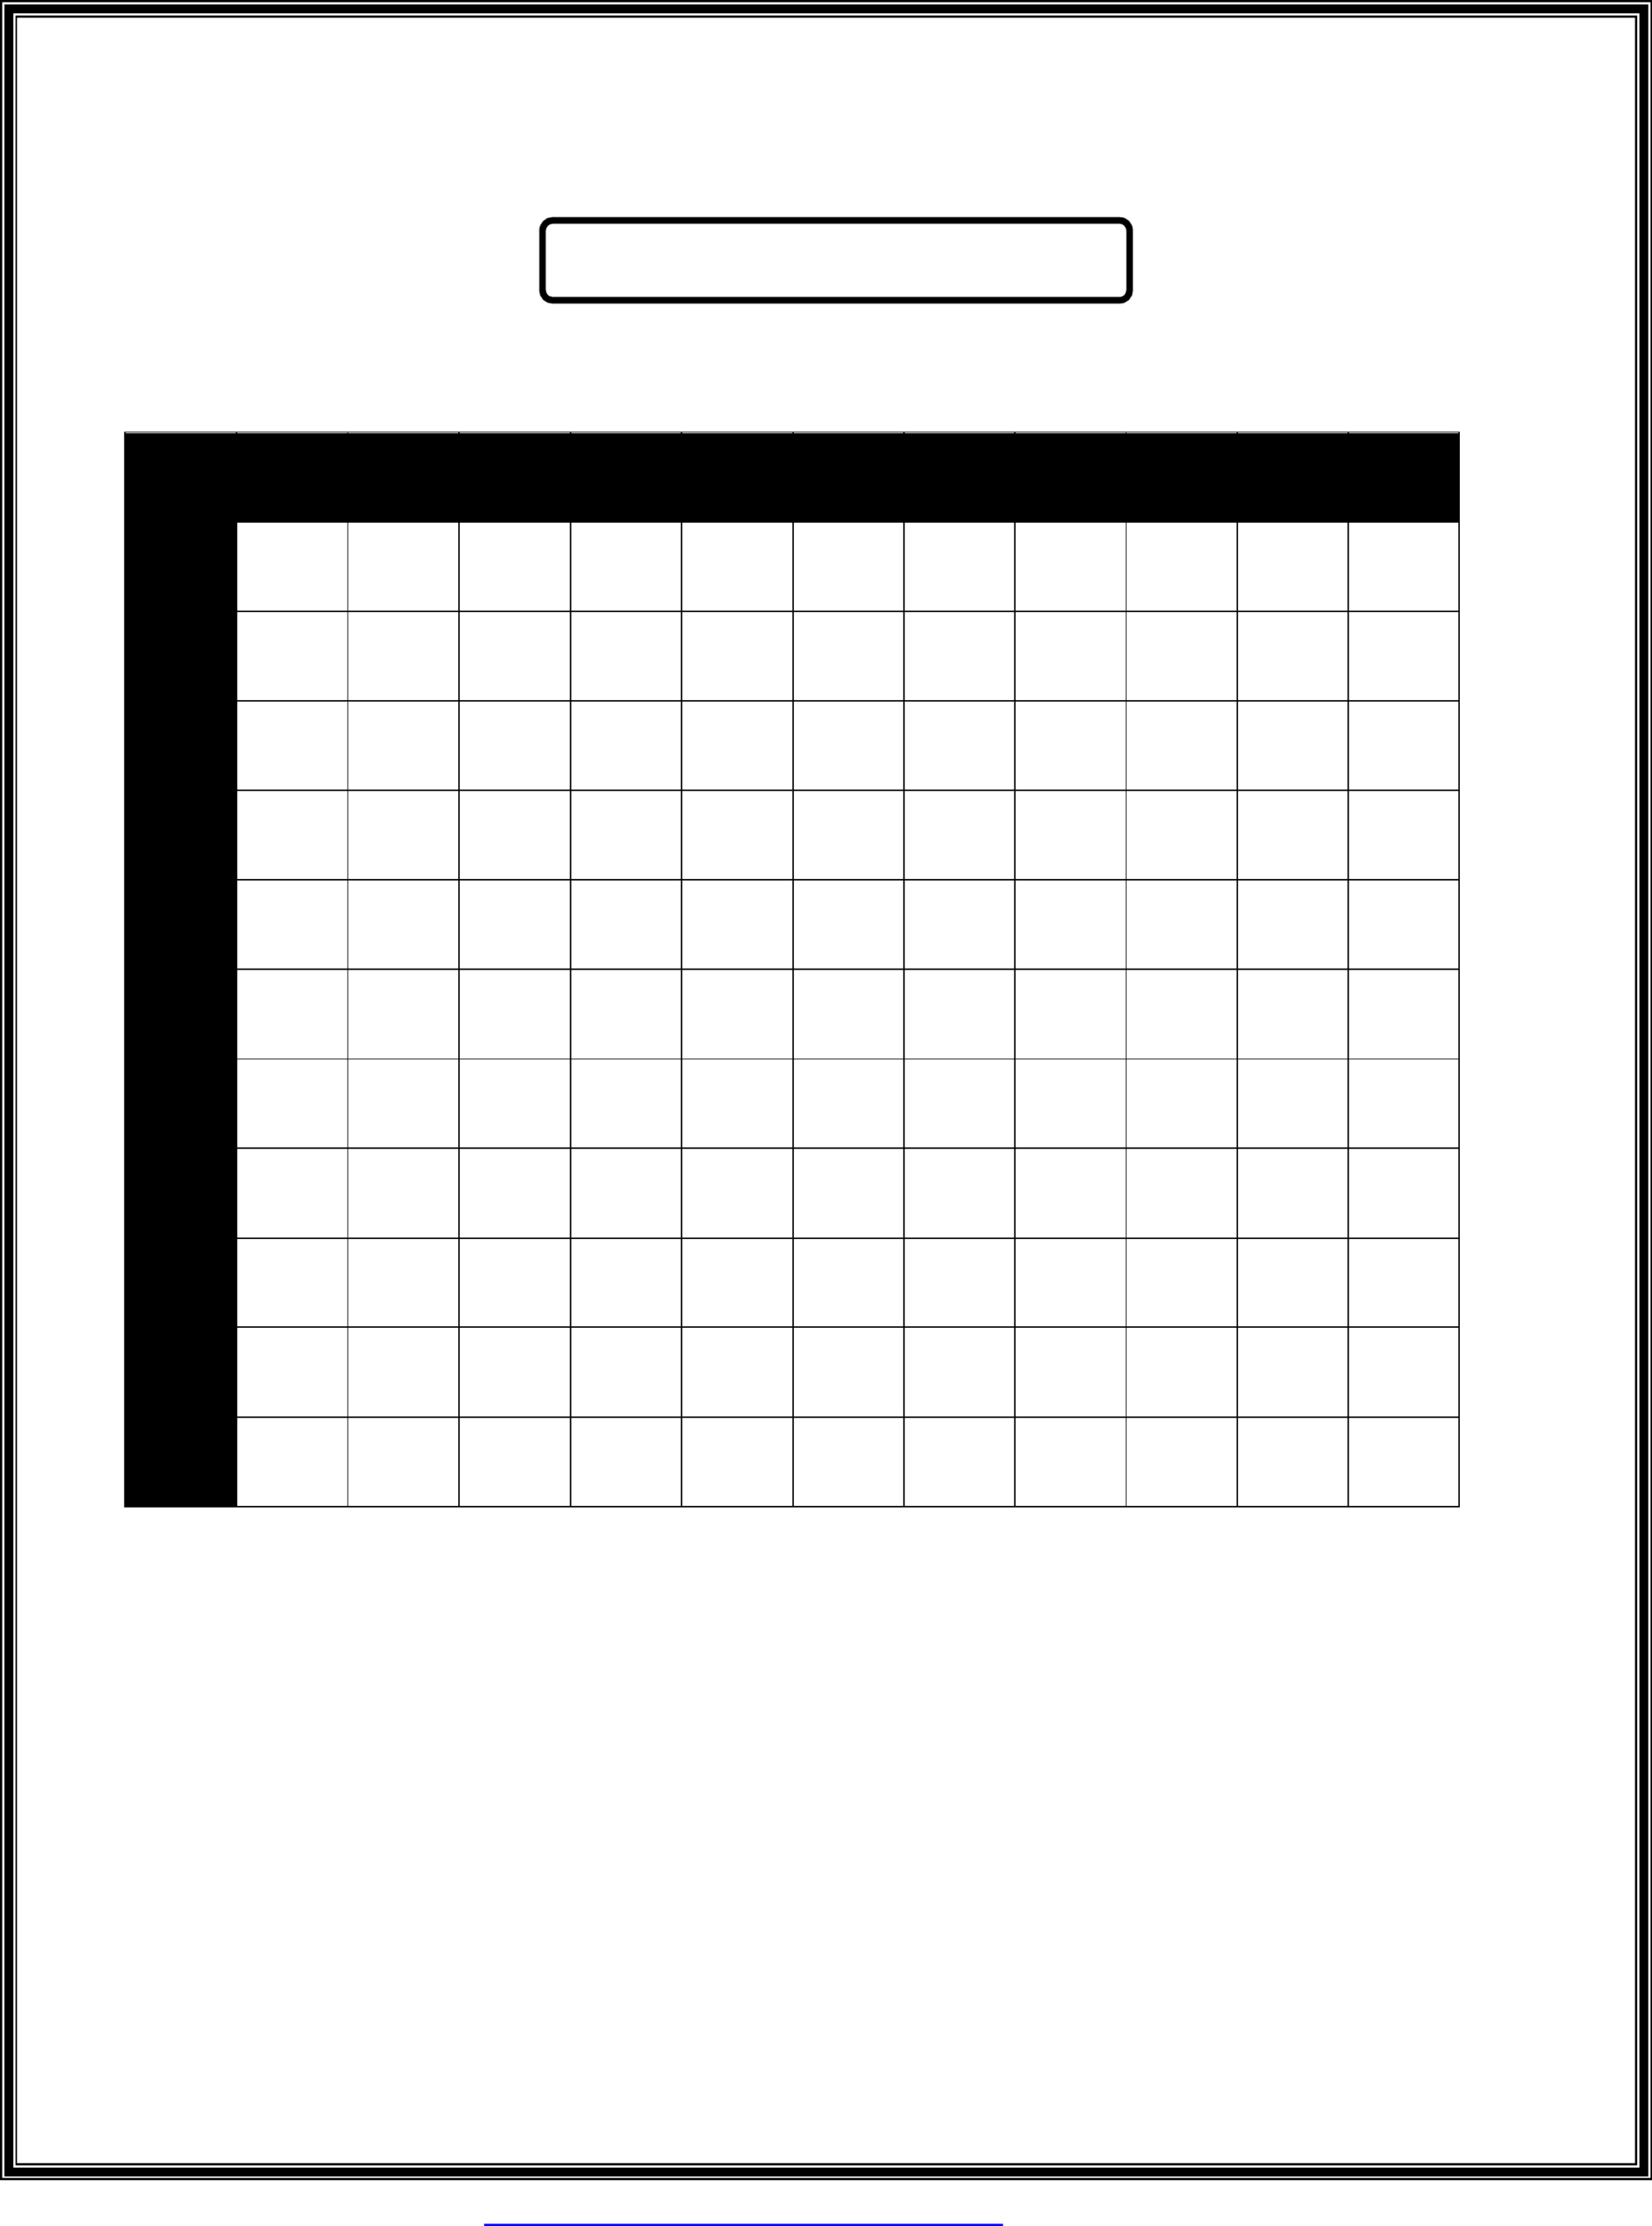 Blank Multiplication Chart With Answers Free Download pertaining to Printable Empty Multiplication Chart